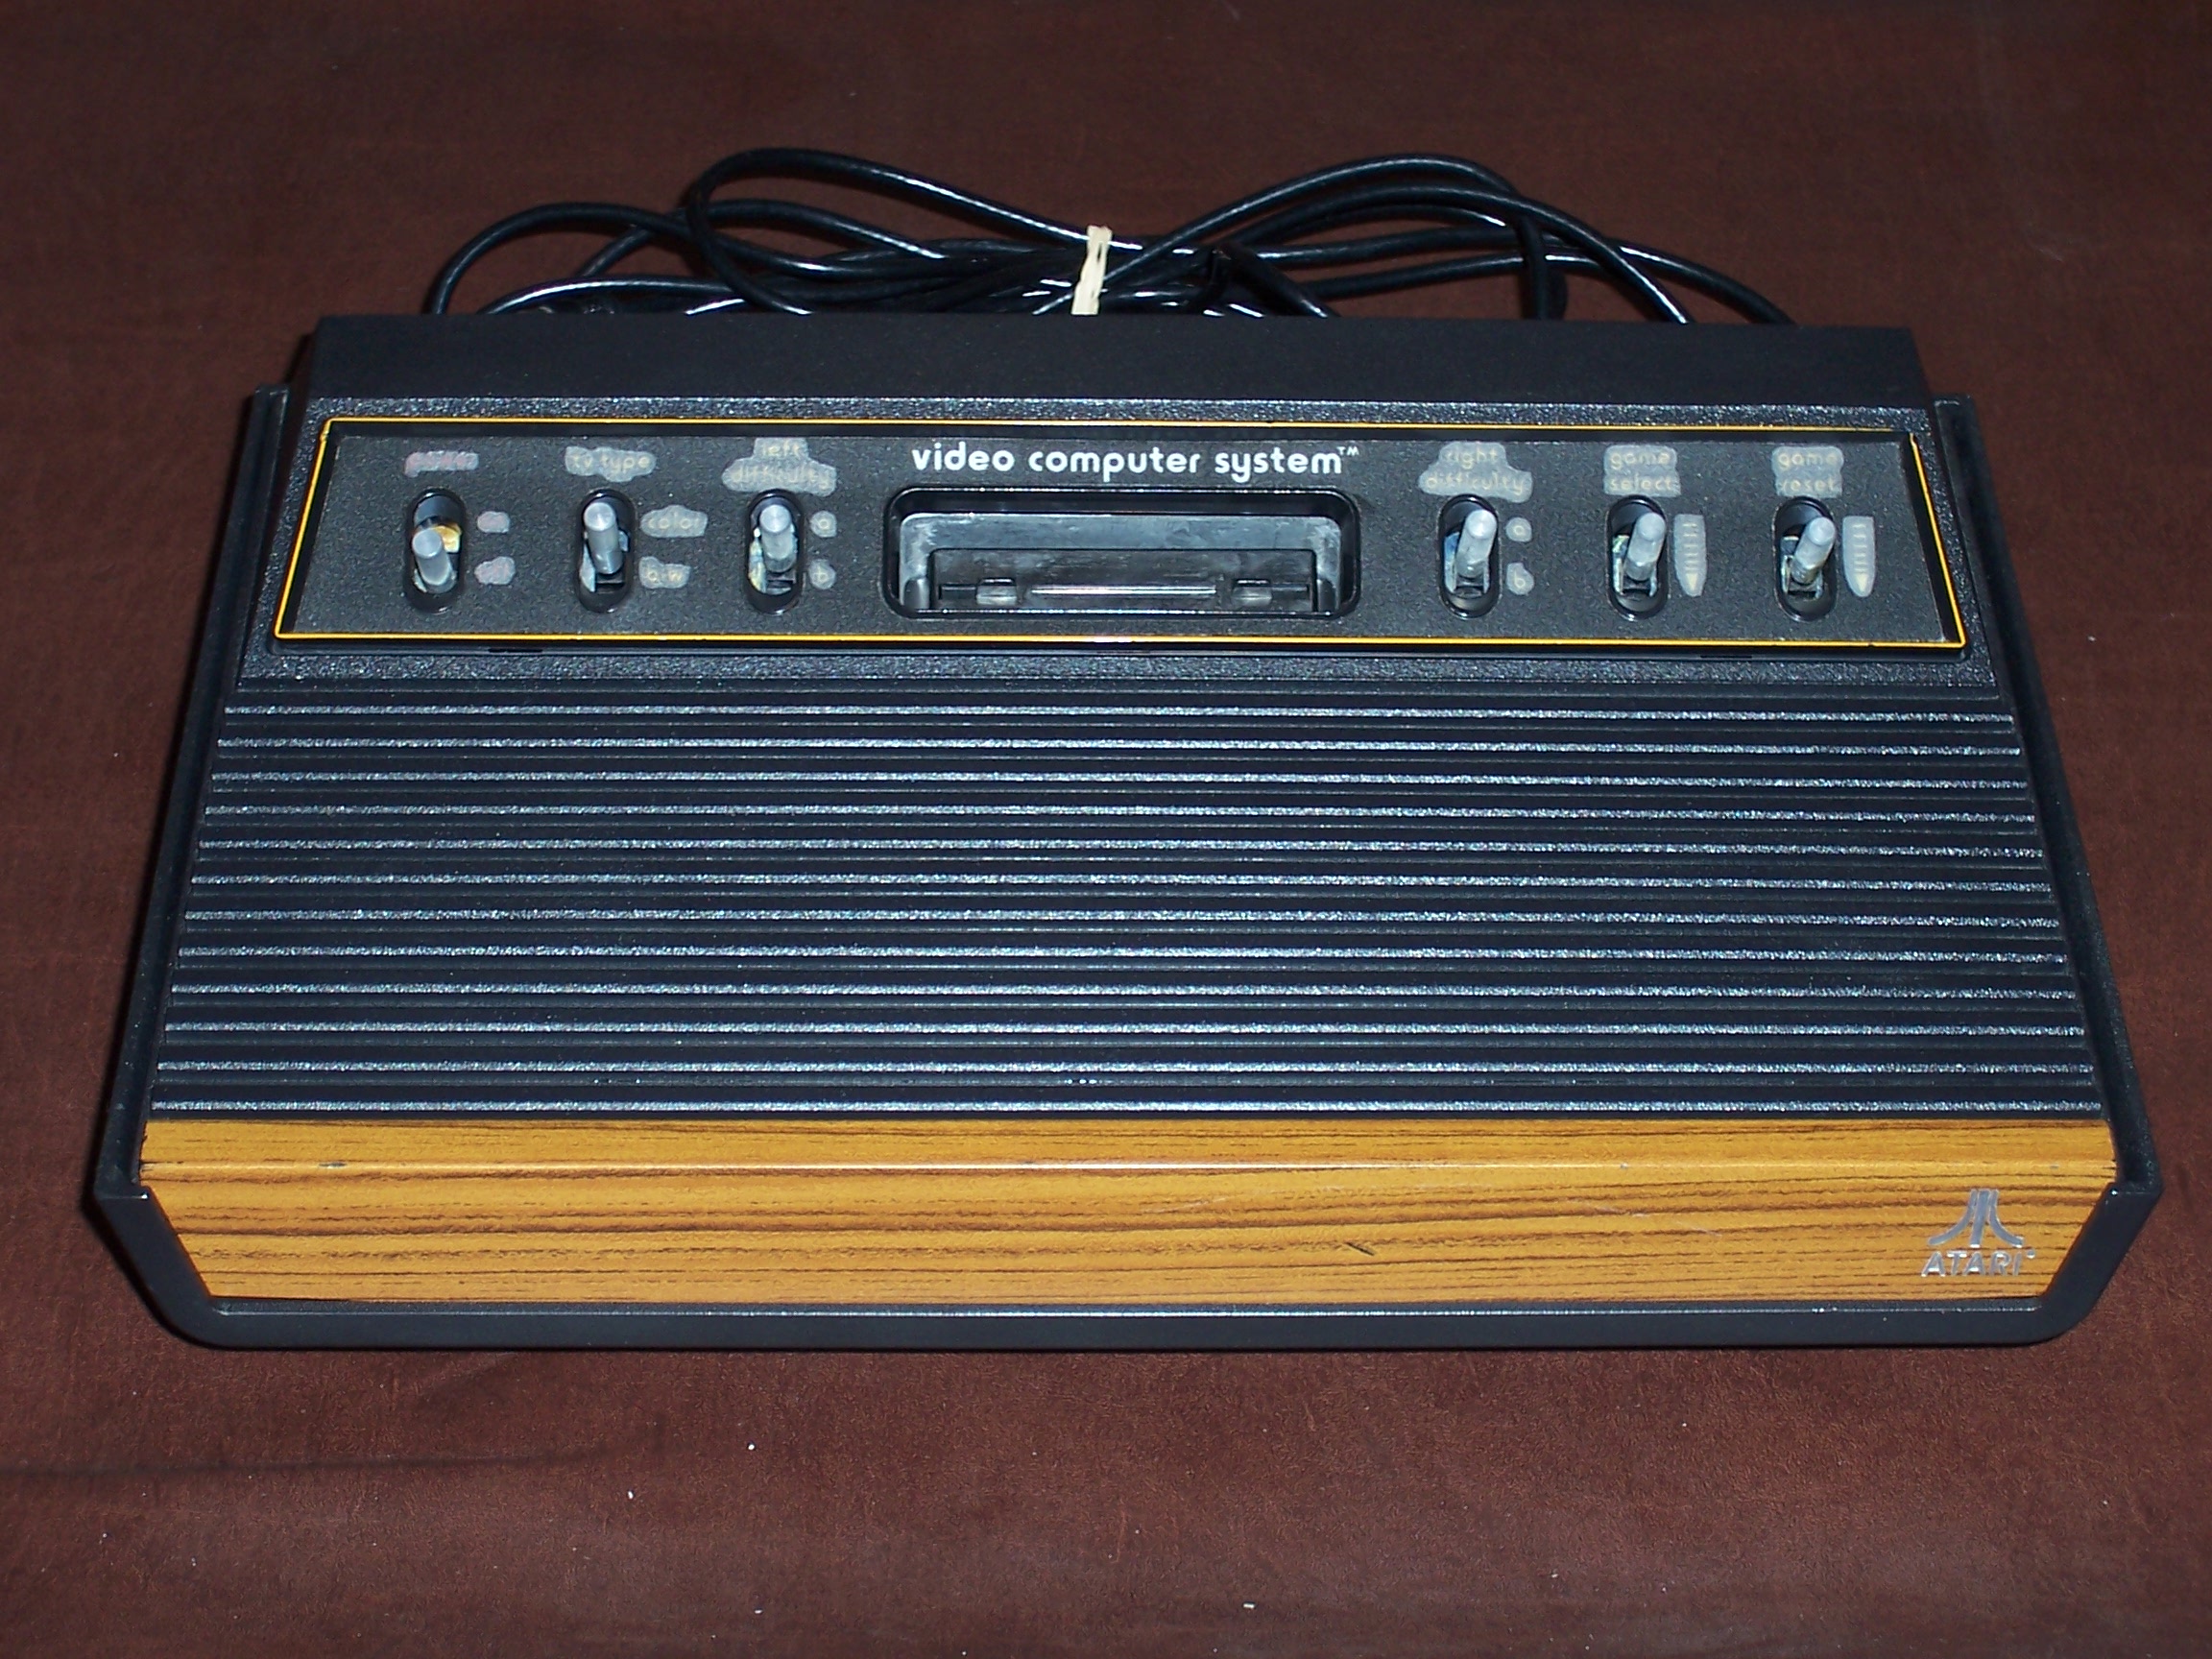 Atari 2600 Items For Sale -UPDATED - Buy, Sell, and Trade ...
